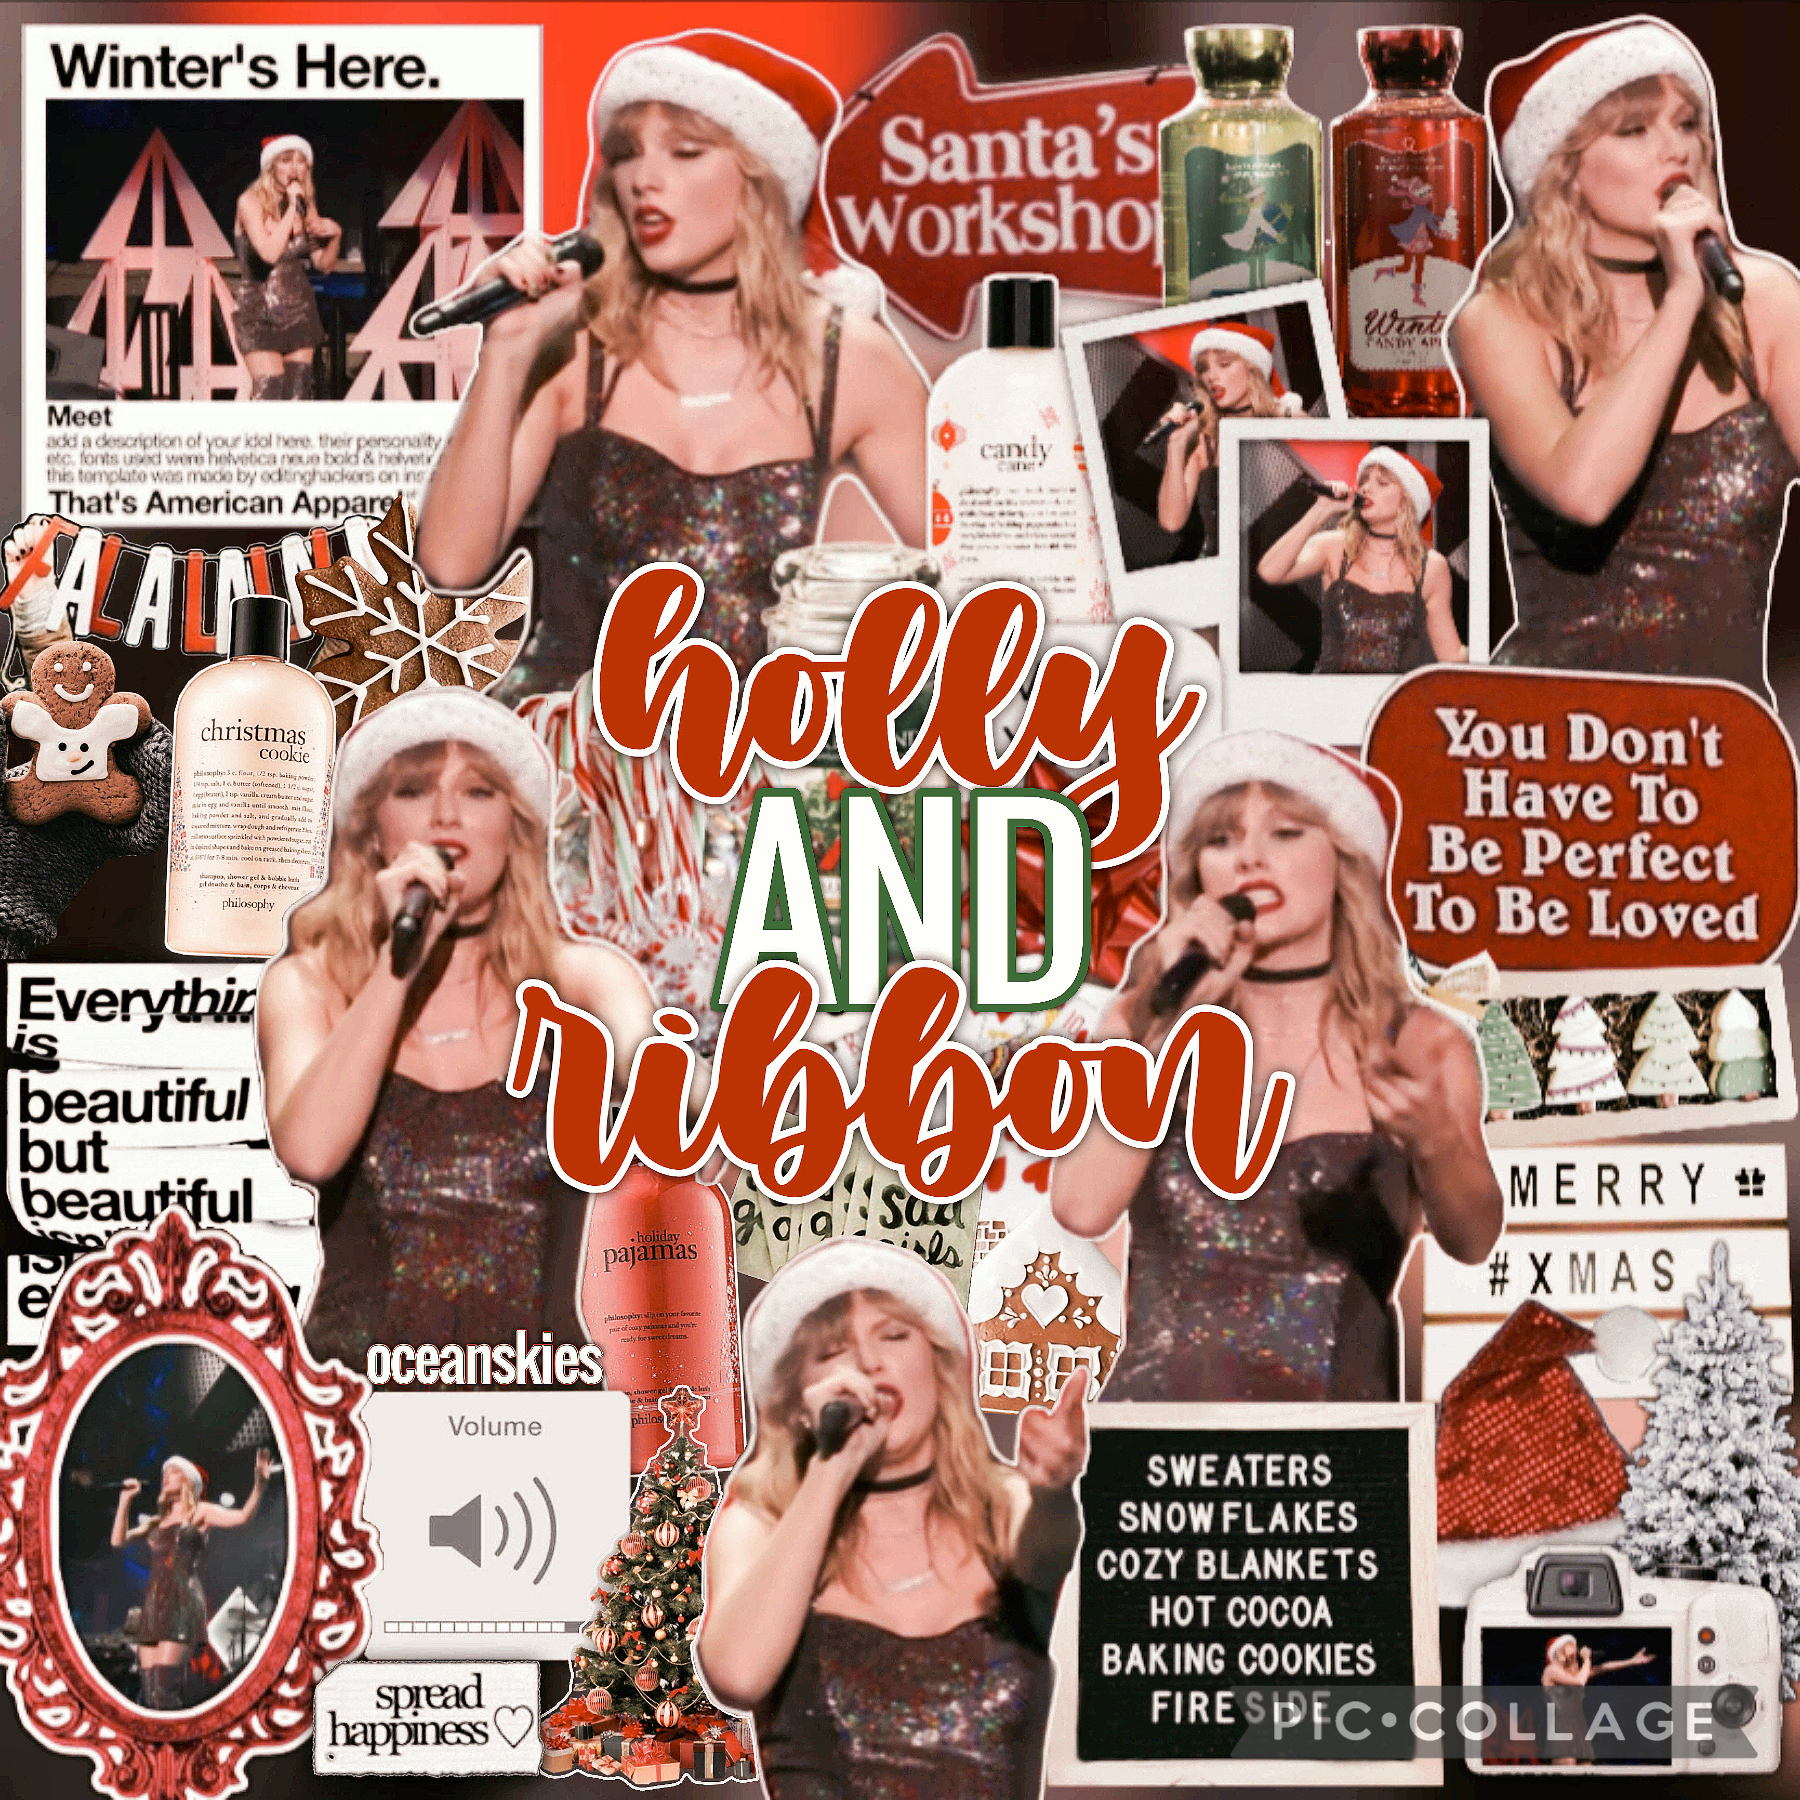 tap
kind of a mess! but it’s okay :) i’m on winter break rn so i’ve had time to edit, im really excited for christmas! happy holidays everyone <3